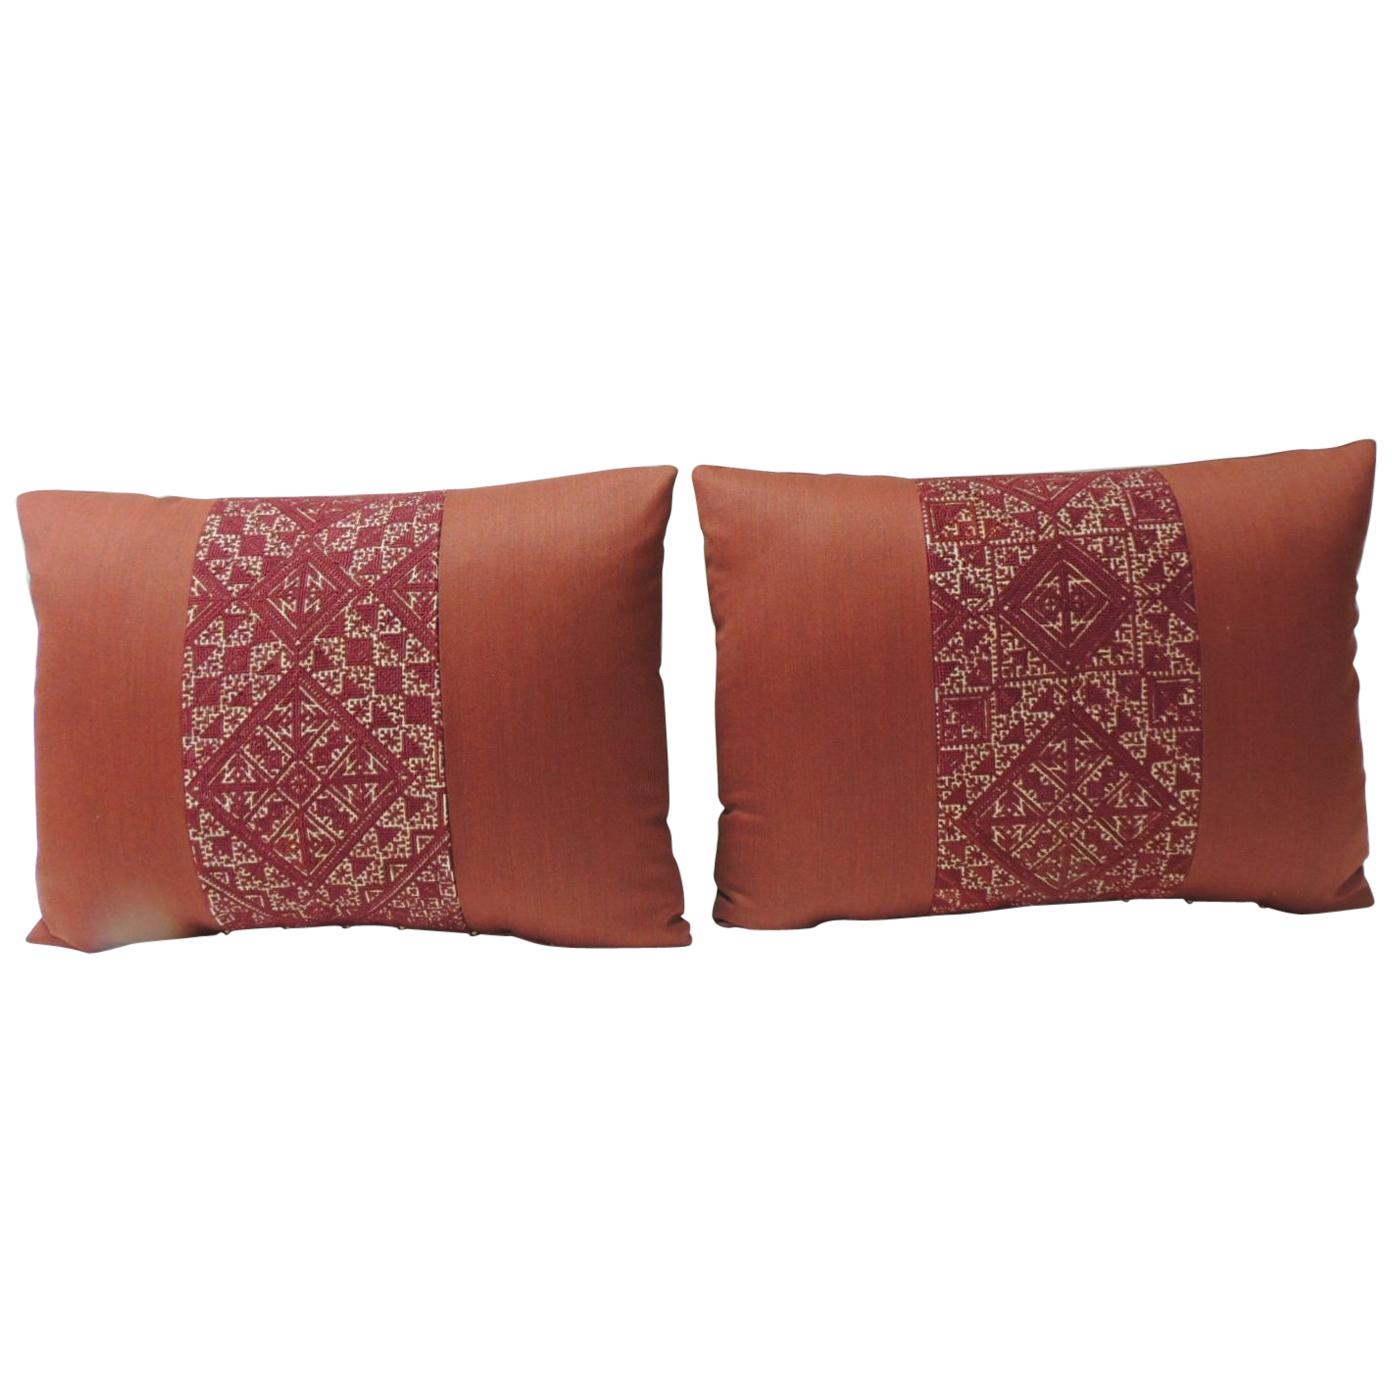 Pair of 19th Century Woven Red Fez Textile Bolster Decorative Pillows